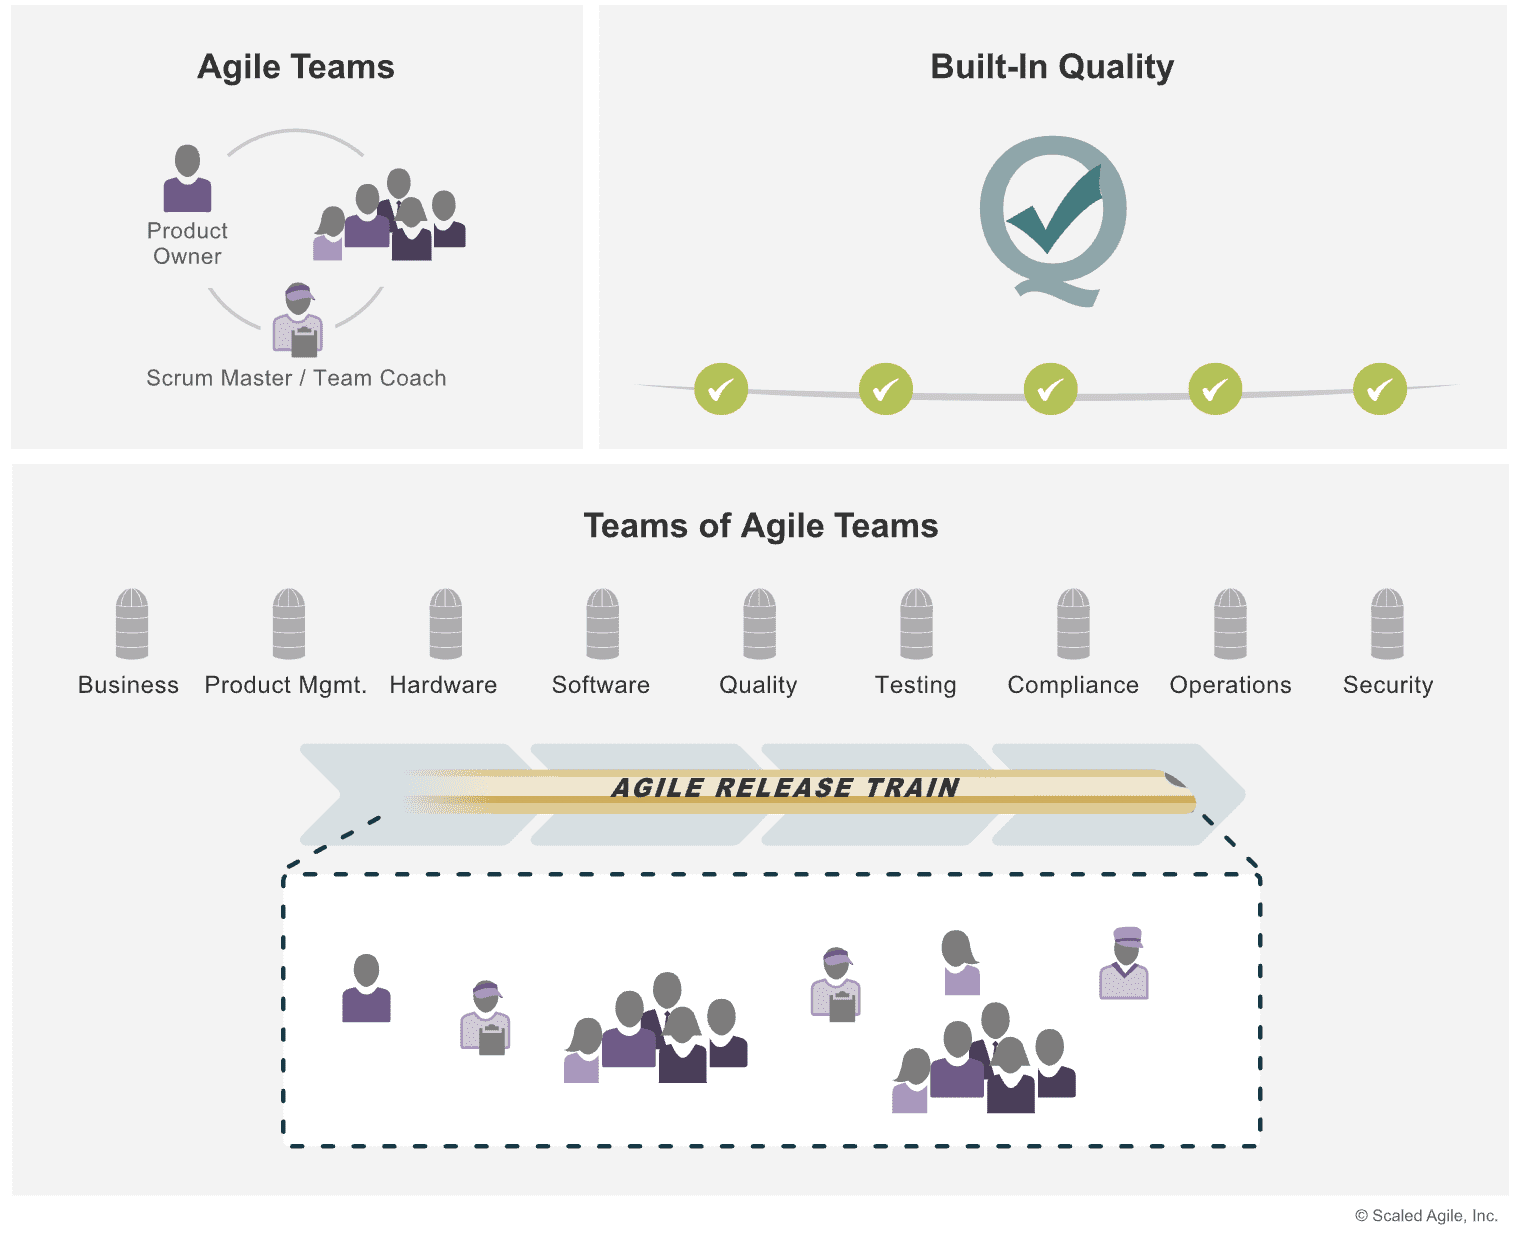 Agile Teams, Built-In Quality, and Teams of Agile Teams graphic from Framework article